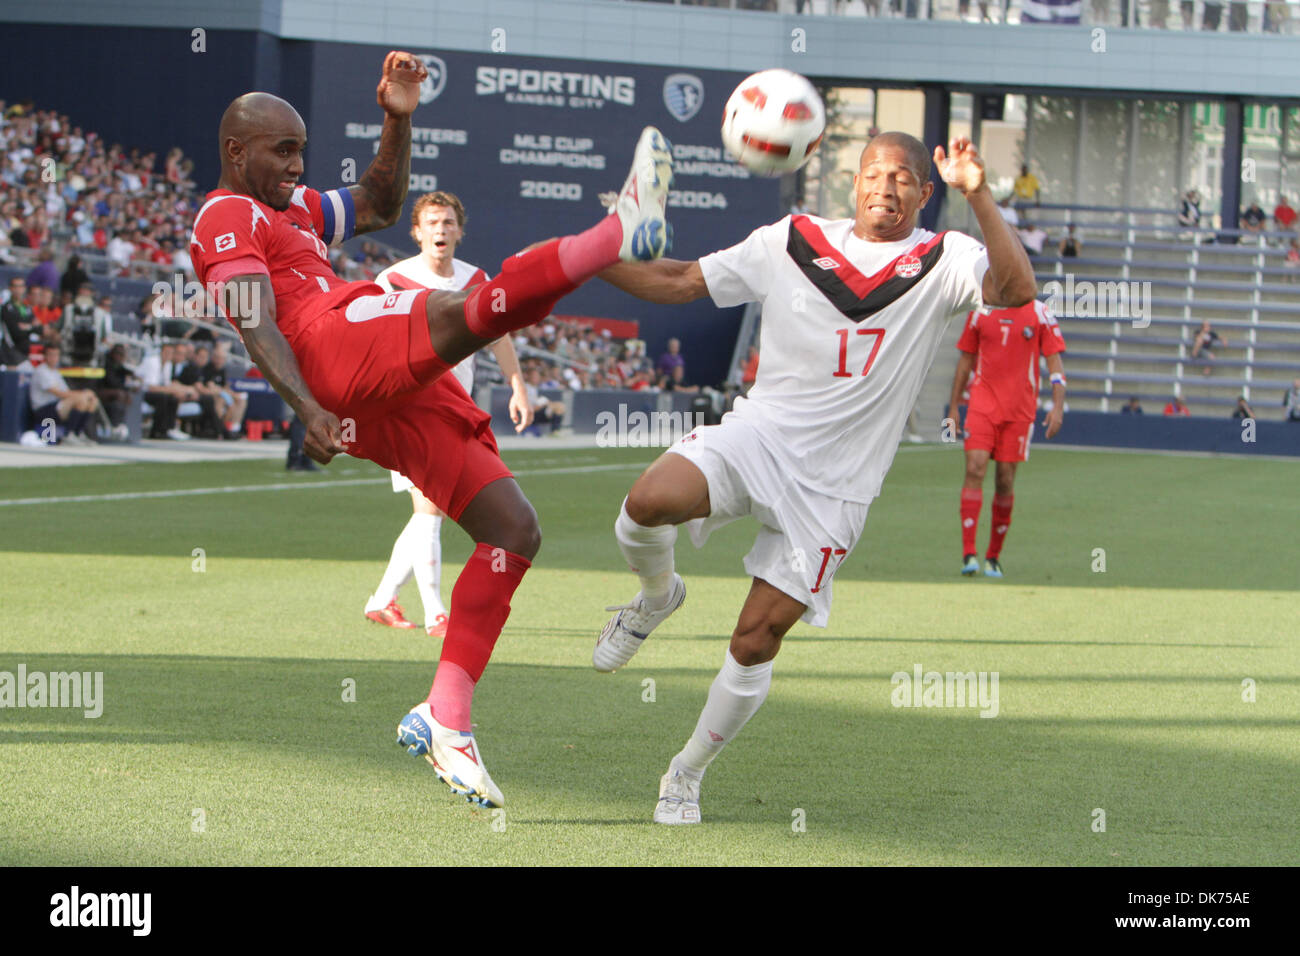 June 14, 2011 - Kansas City, KANSAS, U.S - Panama defender Felipe Baloy (23) high kicks a ball as Canada forward Simeon Jackson (17) goes for the ball in the match between Panama and Canada in Group C play of the 2011 CONCACAF Gold Cup at Livestrong Sporting Park in Kansas City, Kansas. Panama and Canada tied 1-1. (Credit Image: © James Allison/Southcreek Global/ZUMAPRESS.com) Stock Photo